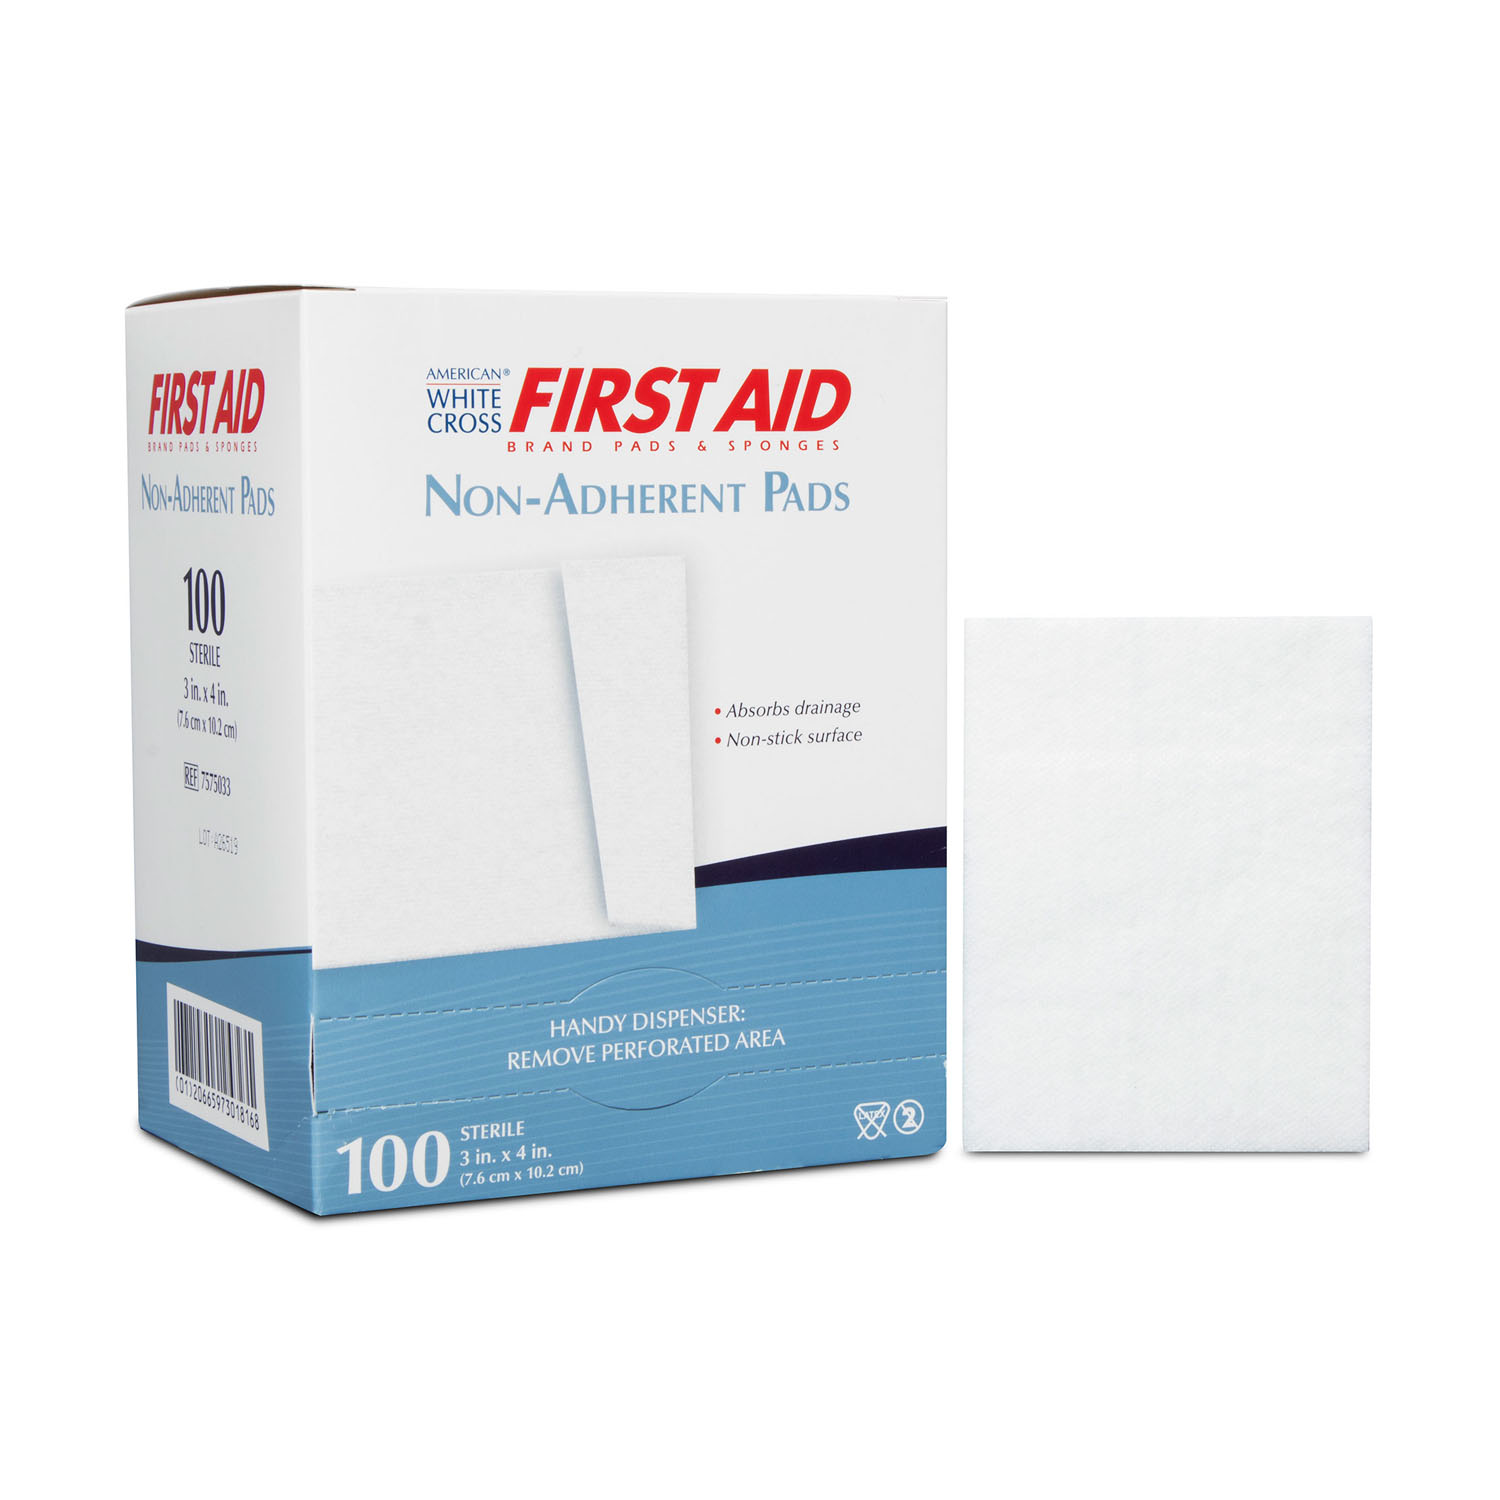 DUKAL NON-ADHERENT STERILE PADS : 7575033 BX $10.43 Stocked